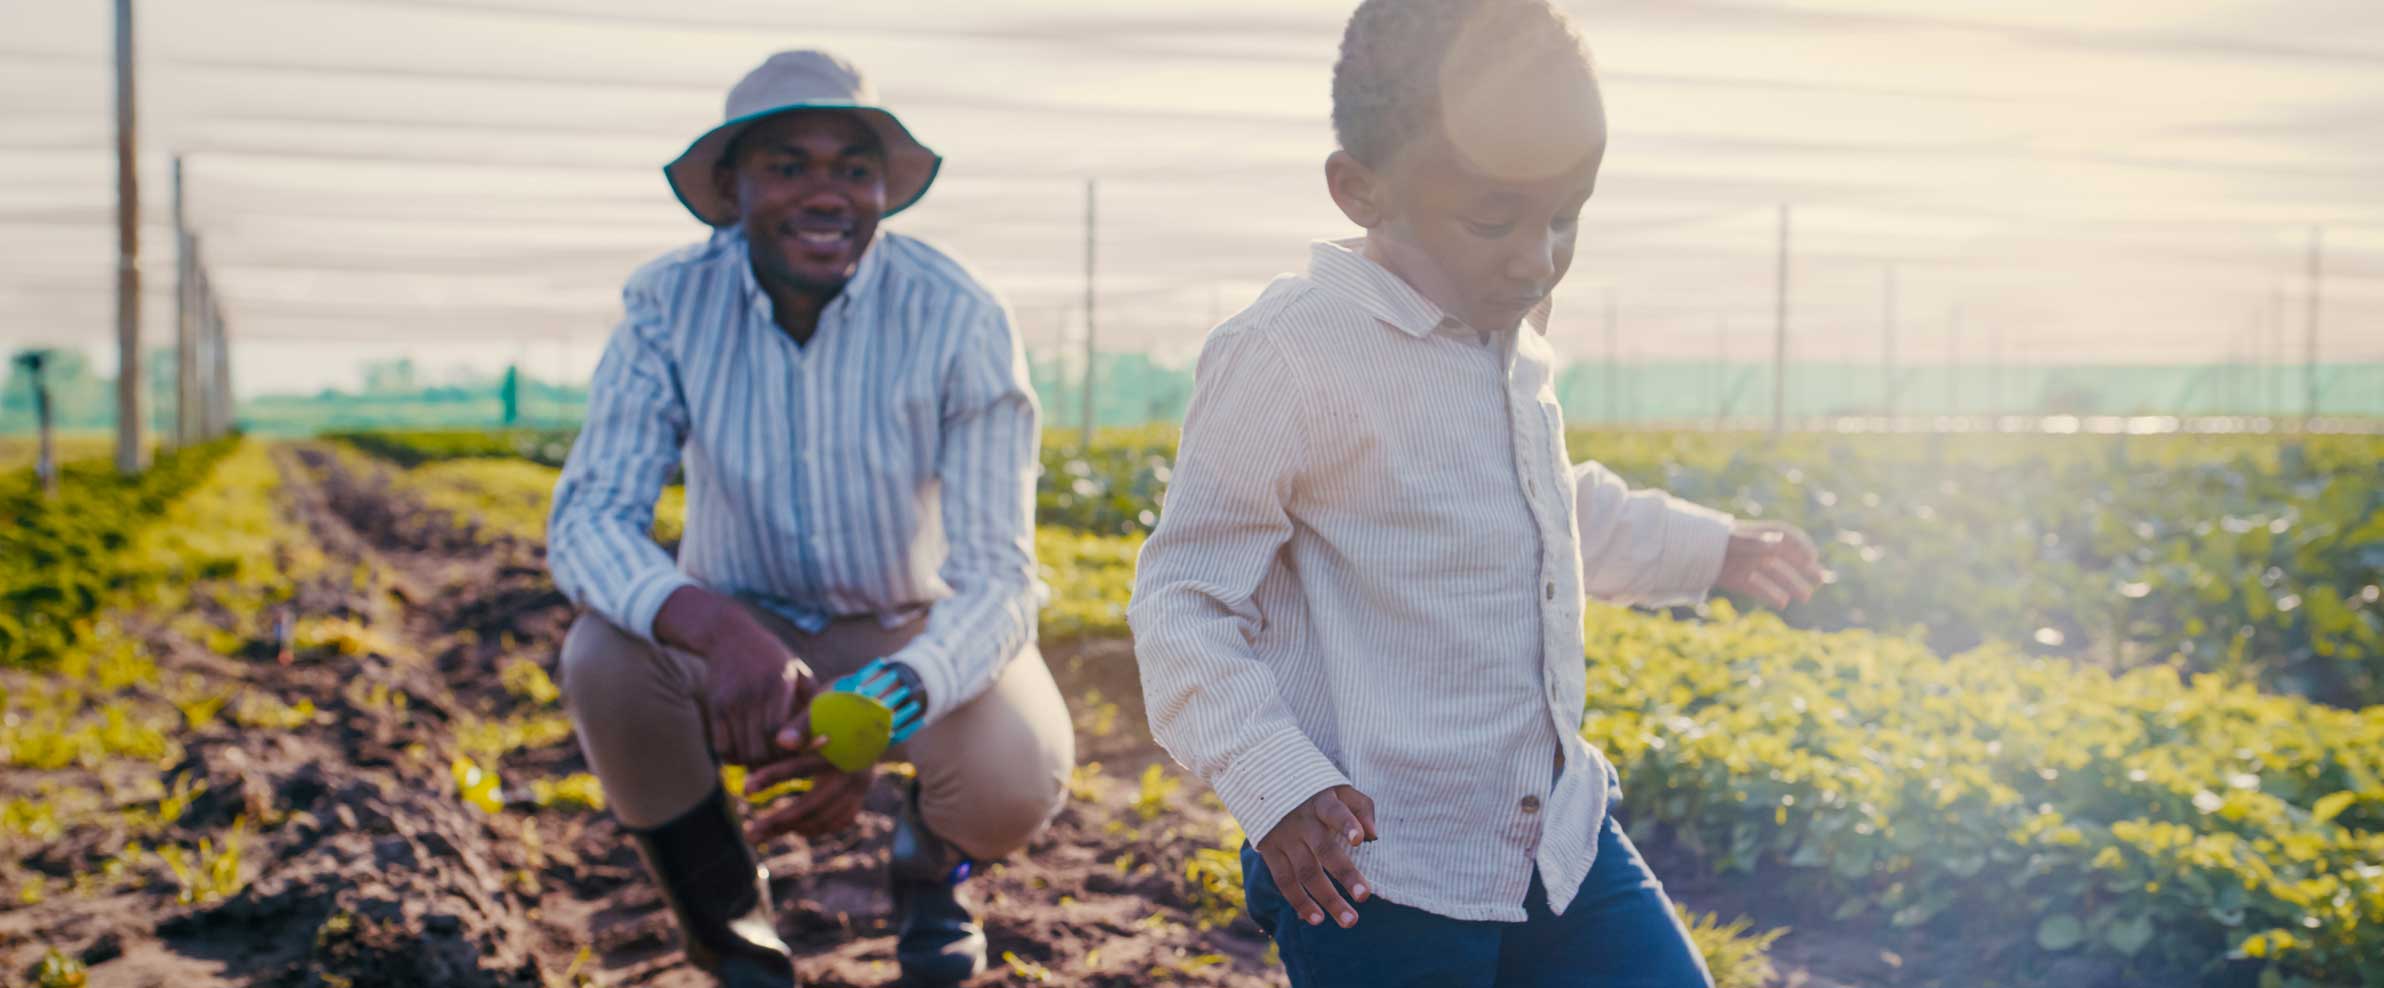 father and child working and laughing in a large-scale, shaded vegetable field